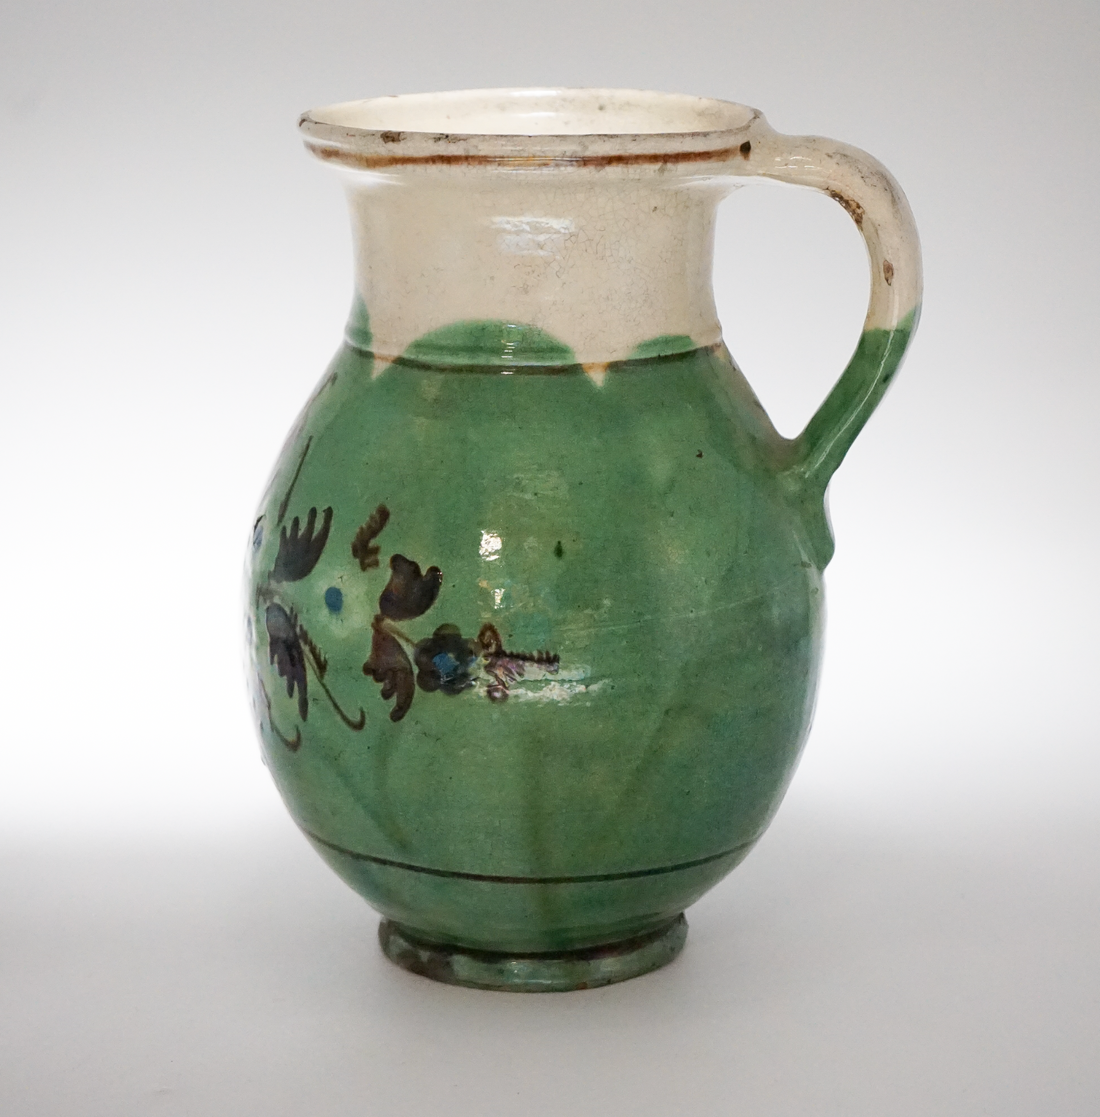 12. Hand Painted Antique Hungarian Pitcher